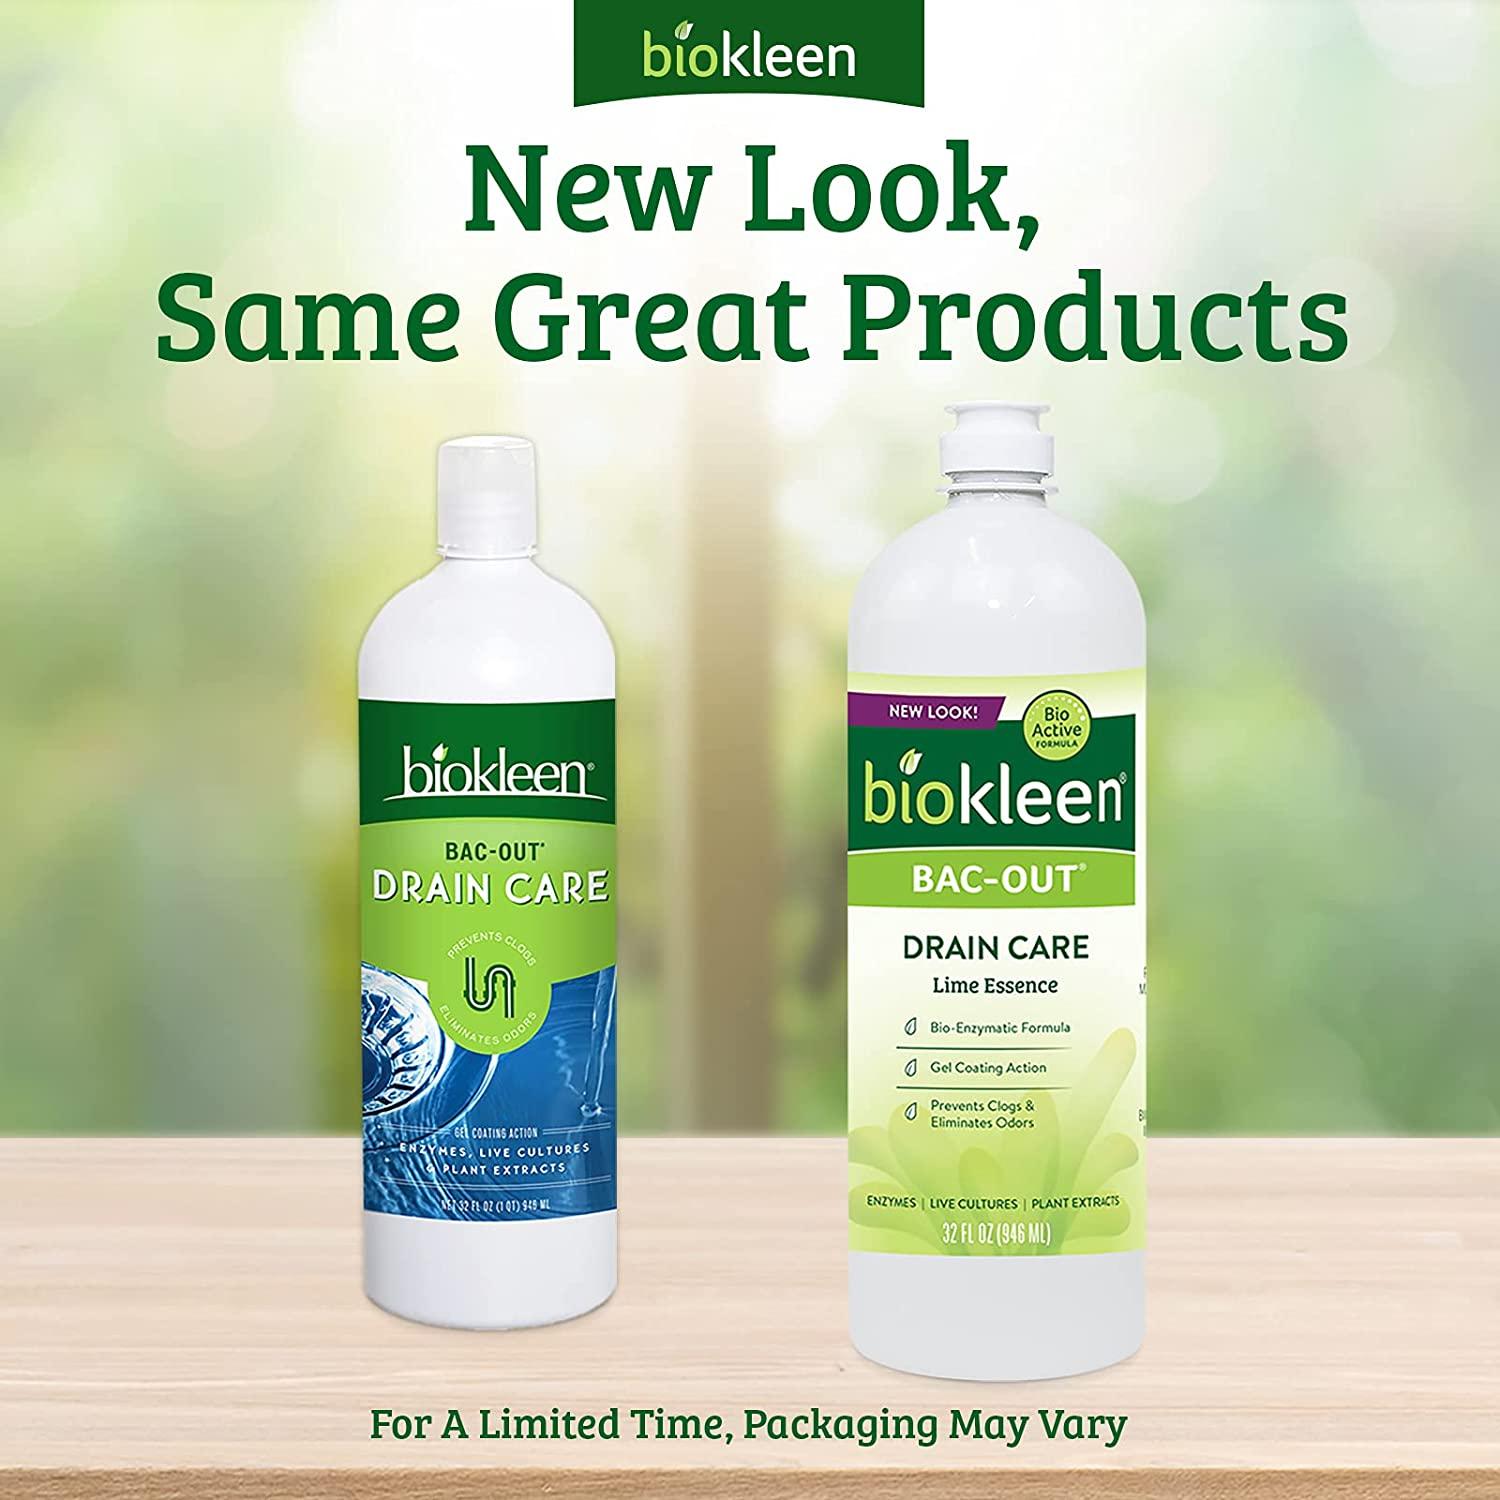 Biokleen Bac-Out Drain Cleaner - 32 Ounce - Deodorizes, Prevents Clogs,  Eco-Friendly, Non-Toxic, Live Enzyme-Producing Cultures and Plant Extracts,  No Artificial Fragrance or Preservatives 1 Pack